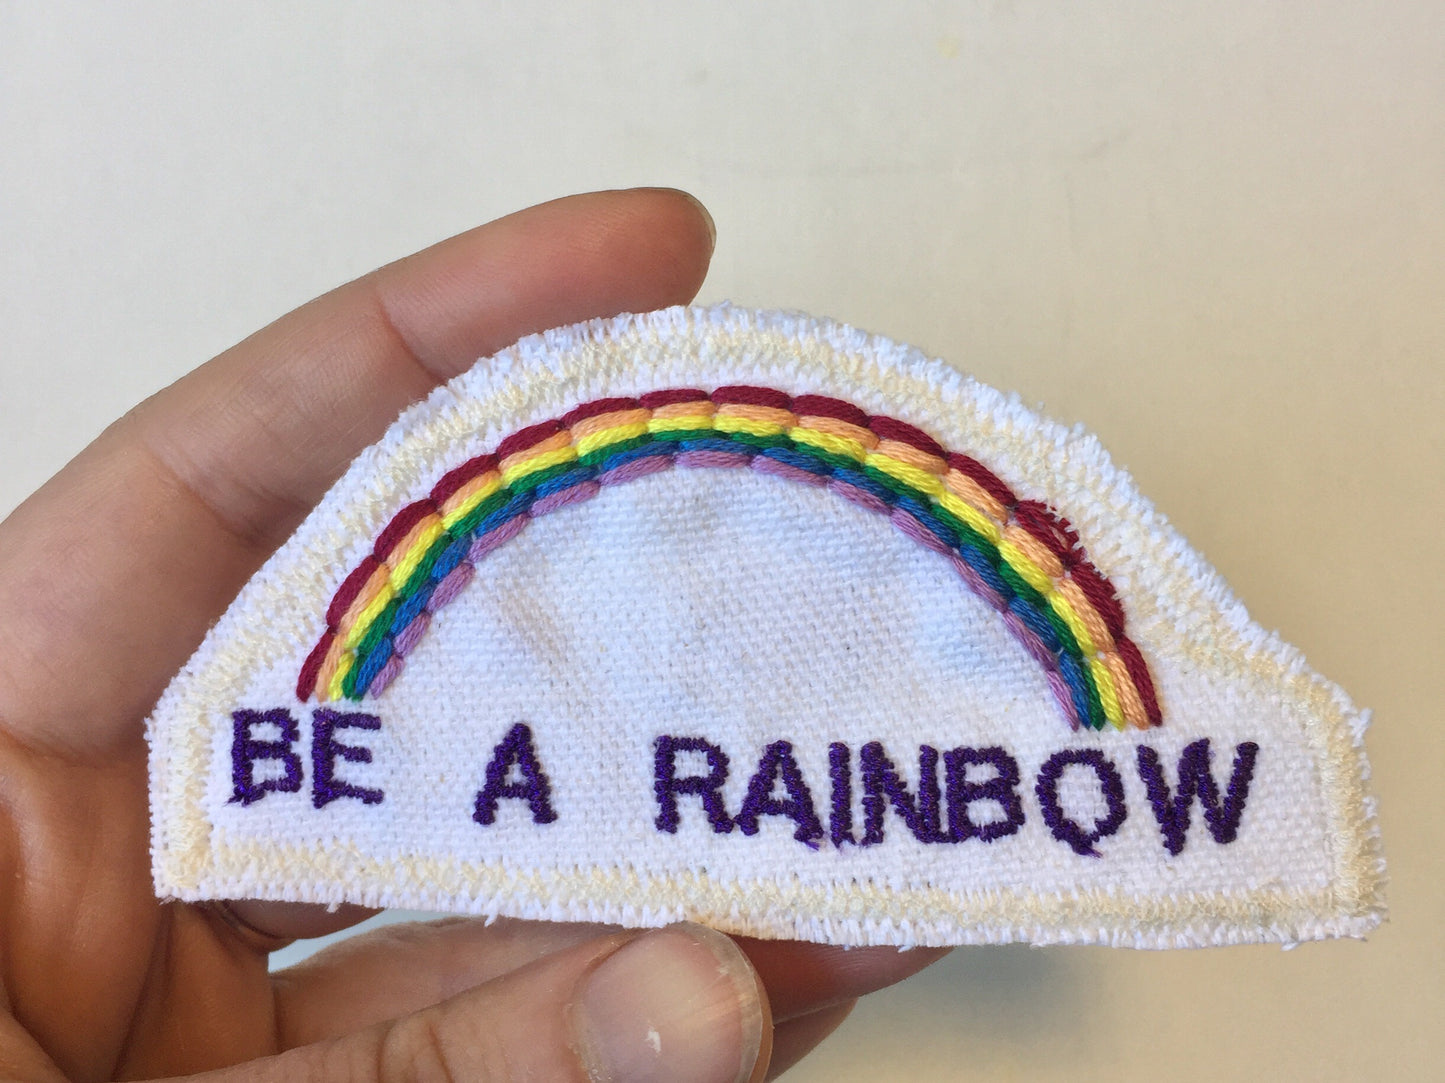 Be Yourself. Handmade Canvas Patch